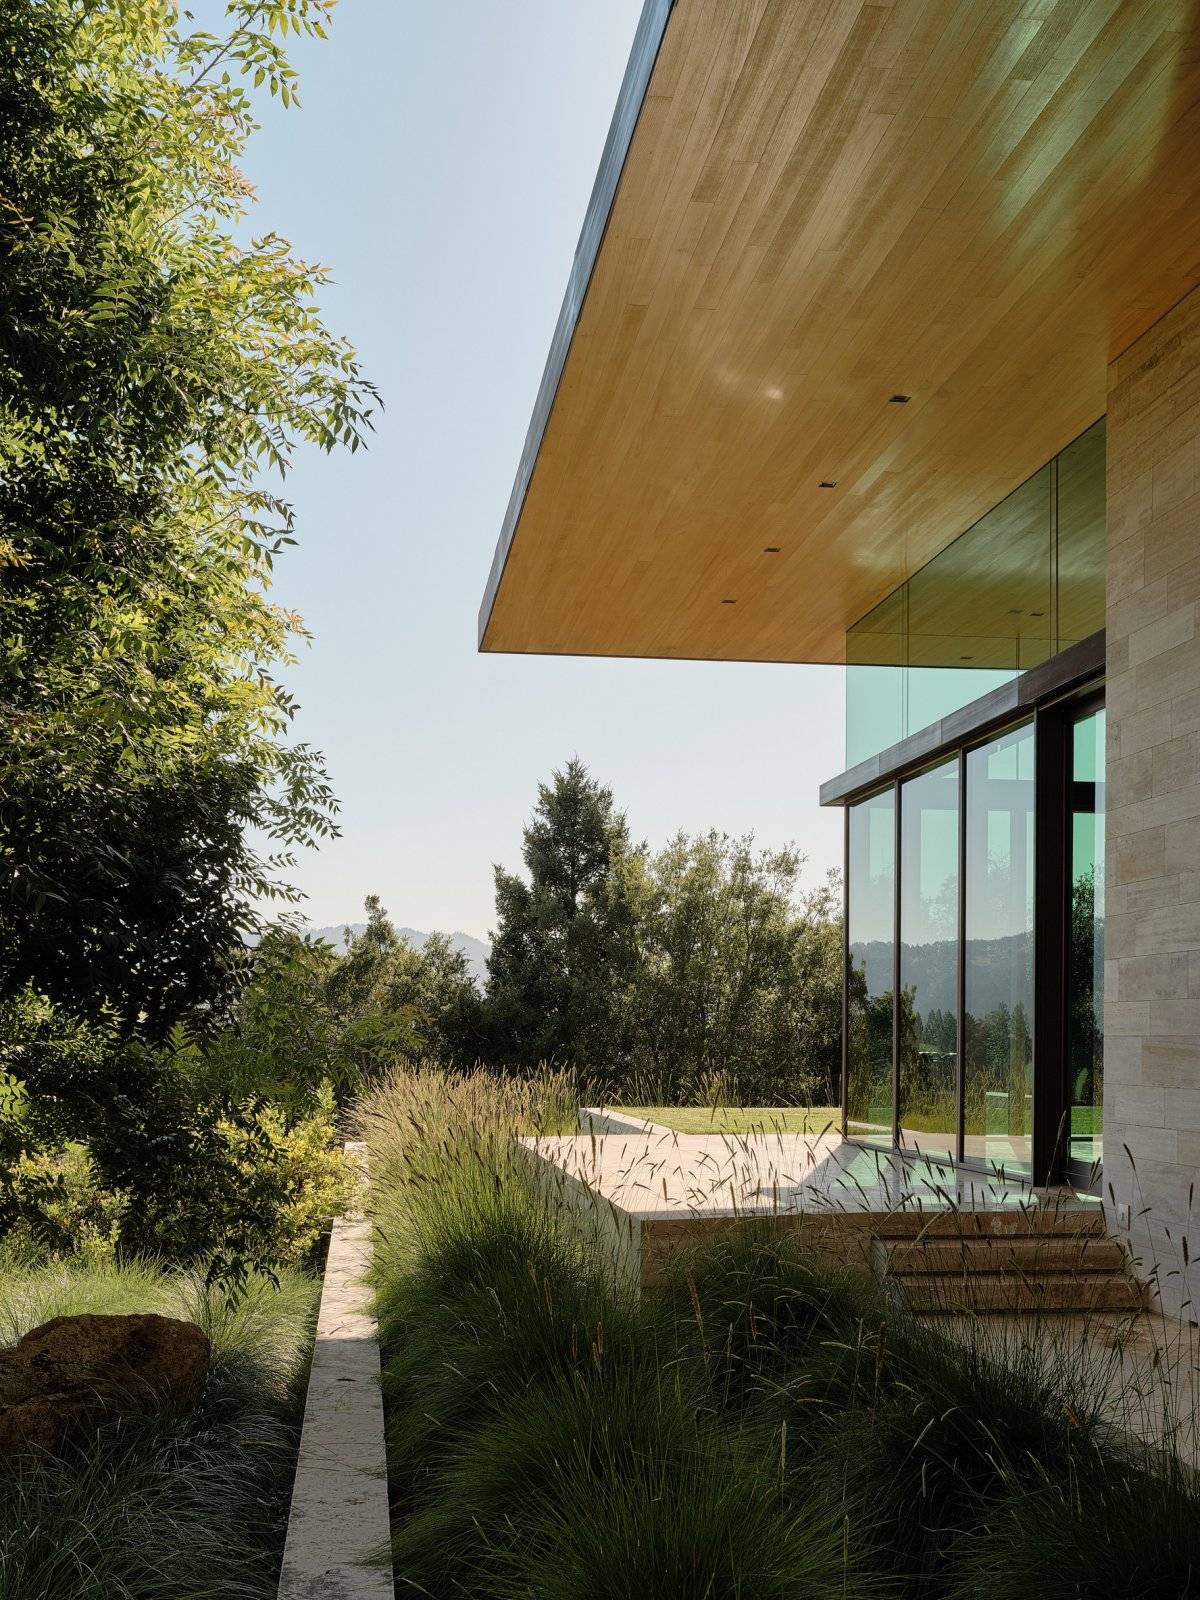 Private Residence in Napa designed by Piechota Architecture